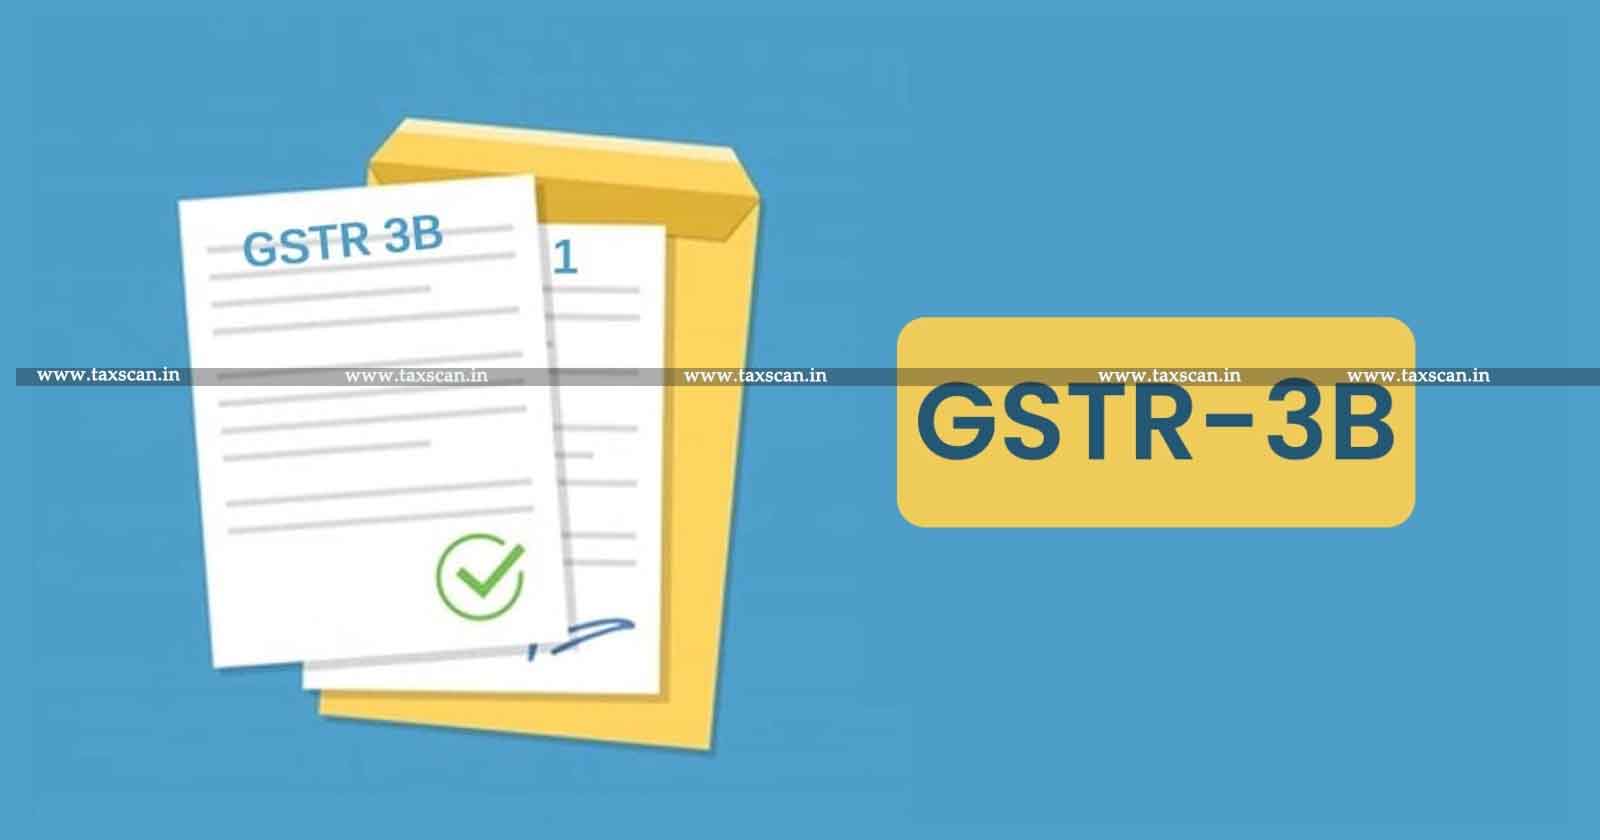 Permission to rectify - affording Form GSTR-3B - Kerala HC - Appellate Authority - GST Act - taxscan